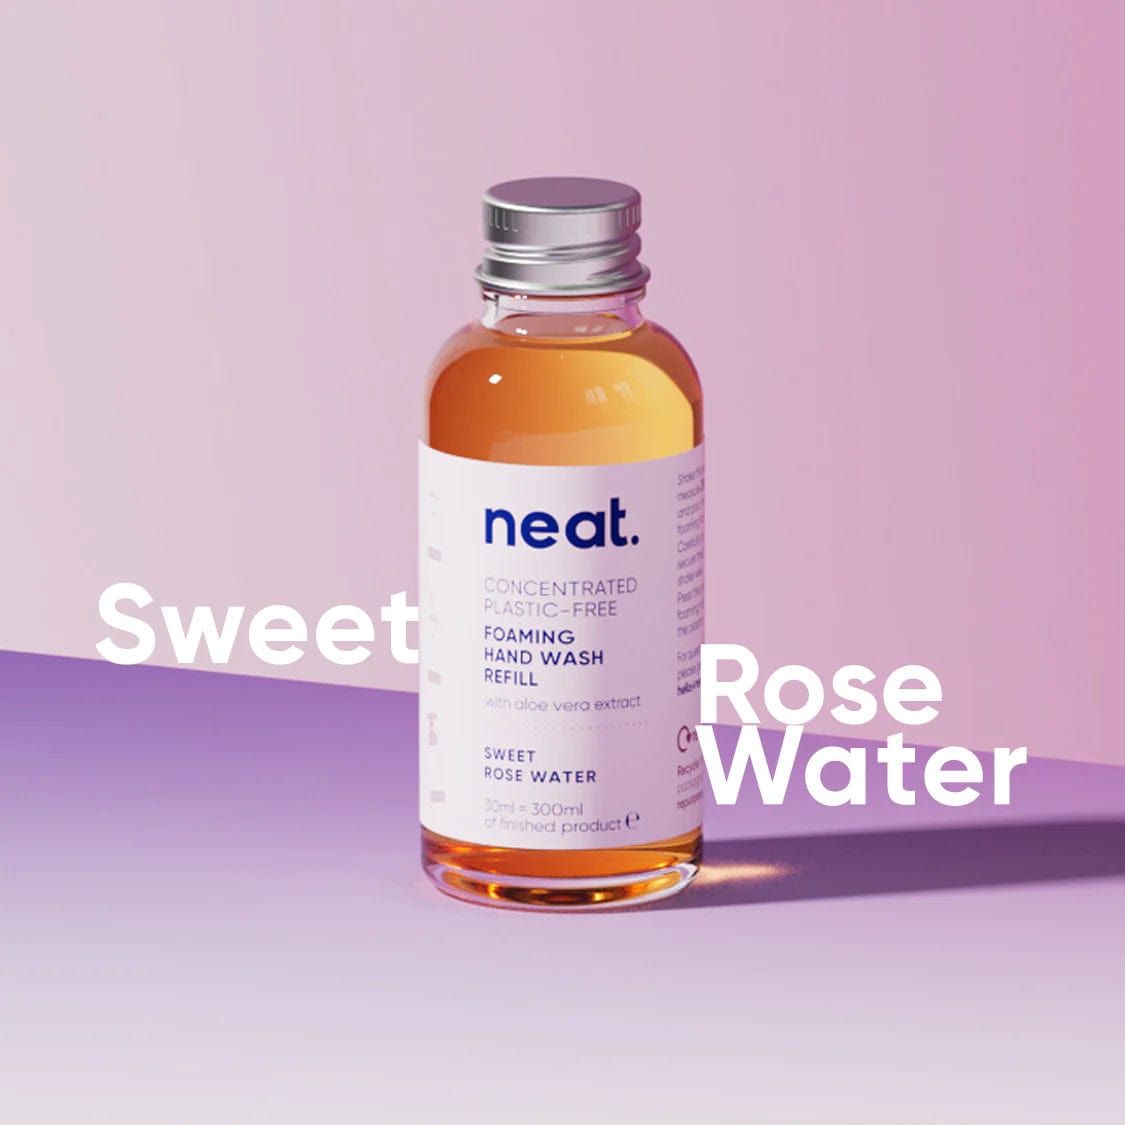 neat. Soap Neat Foaming Handwash Refill Concentrate - Sweet Rose Water